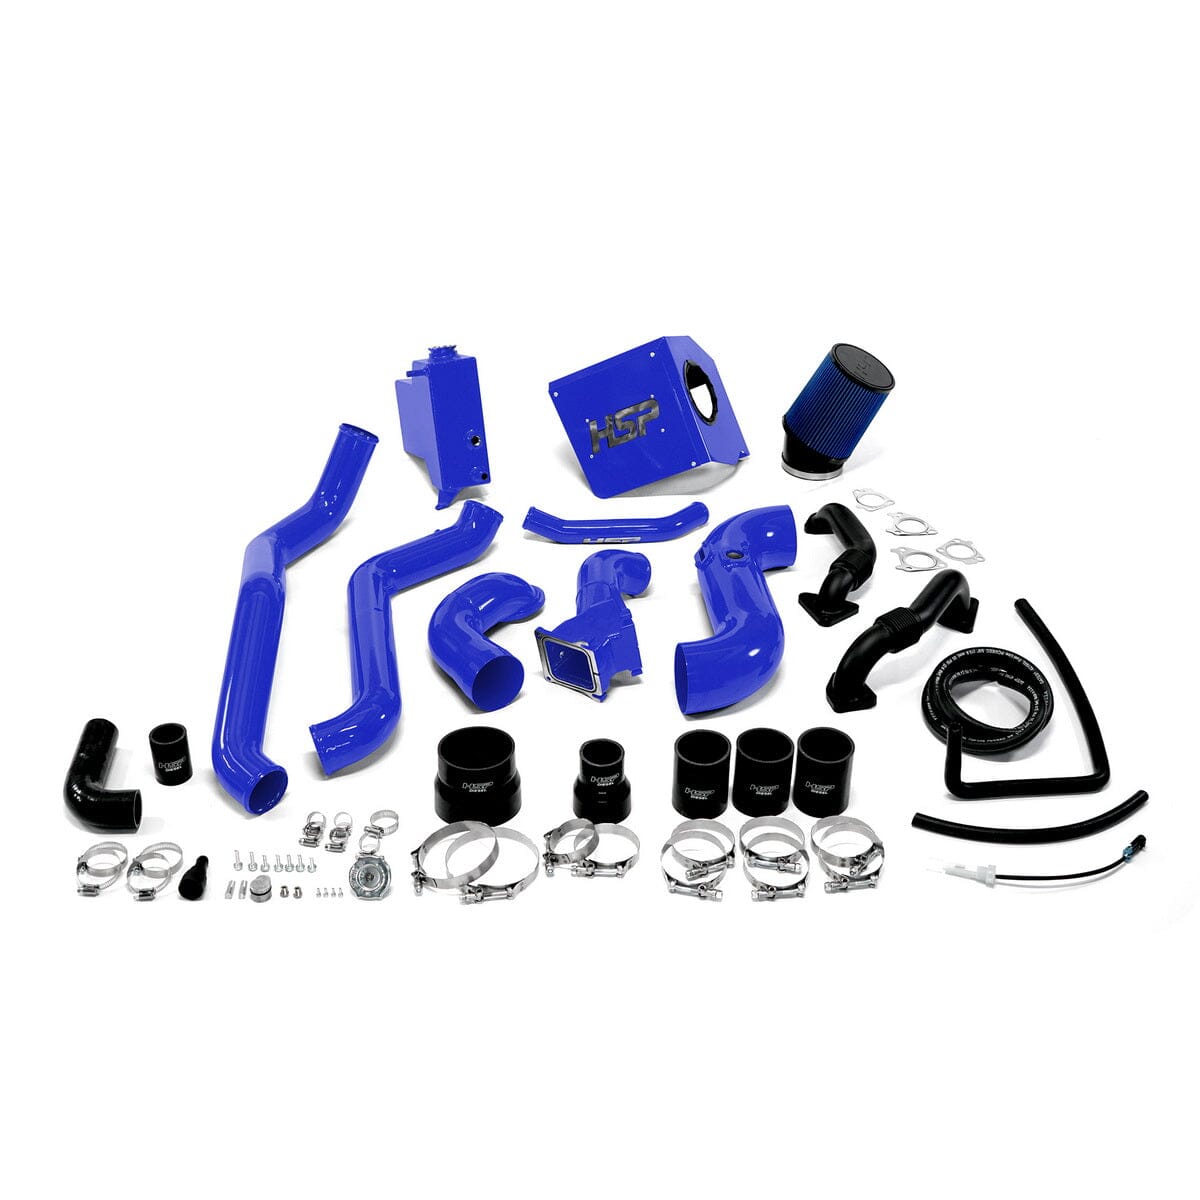 HSP Deluxe Max Air Flow Bundle (2013-2014 Chevrolet / GMC) Cold Air Intake HSP Diesel Candy Blue 